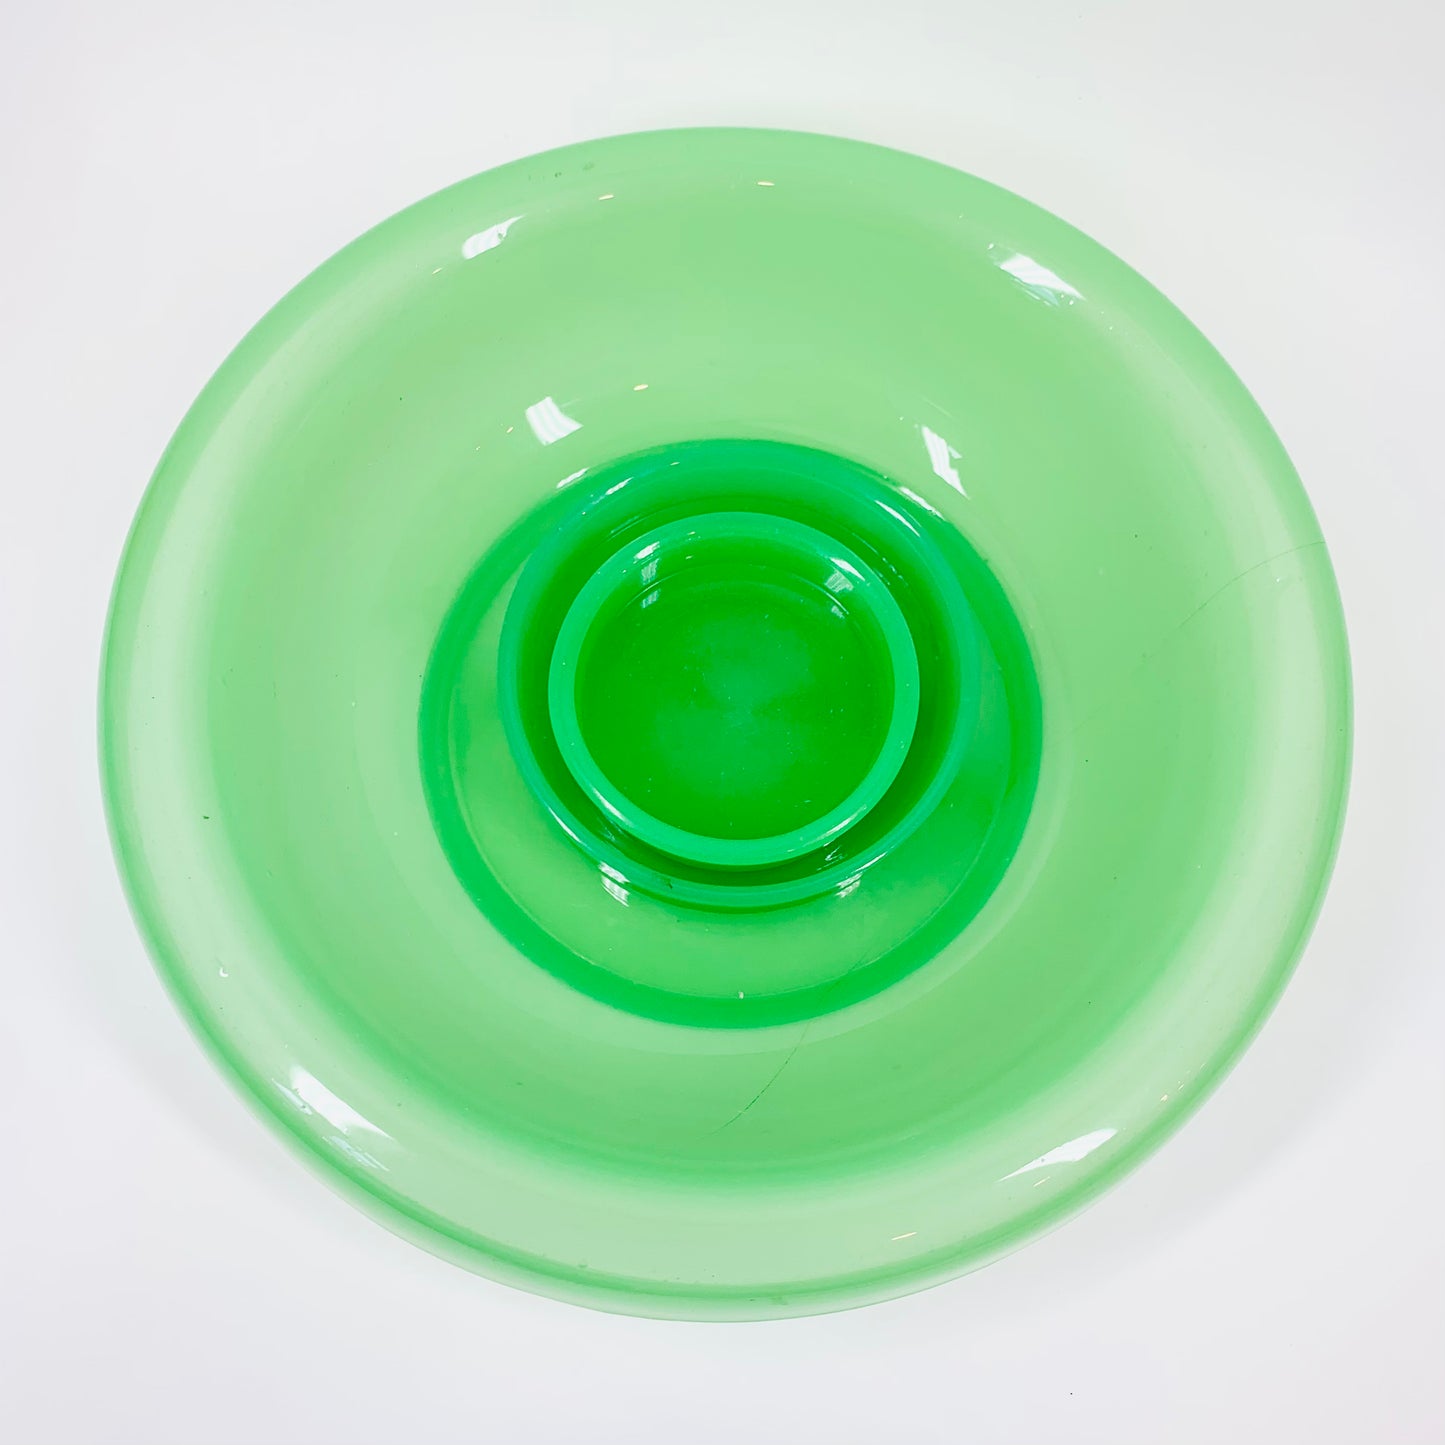 Extremely rare large antique French green opaline glass bowl